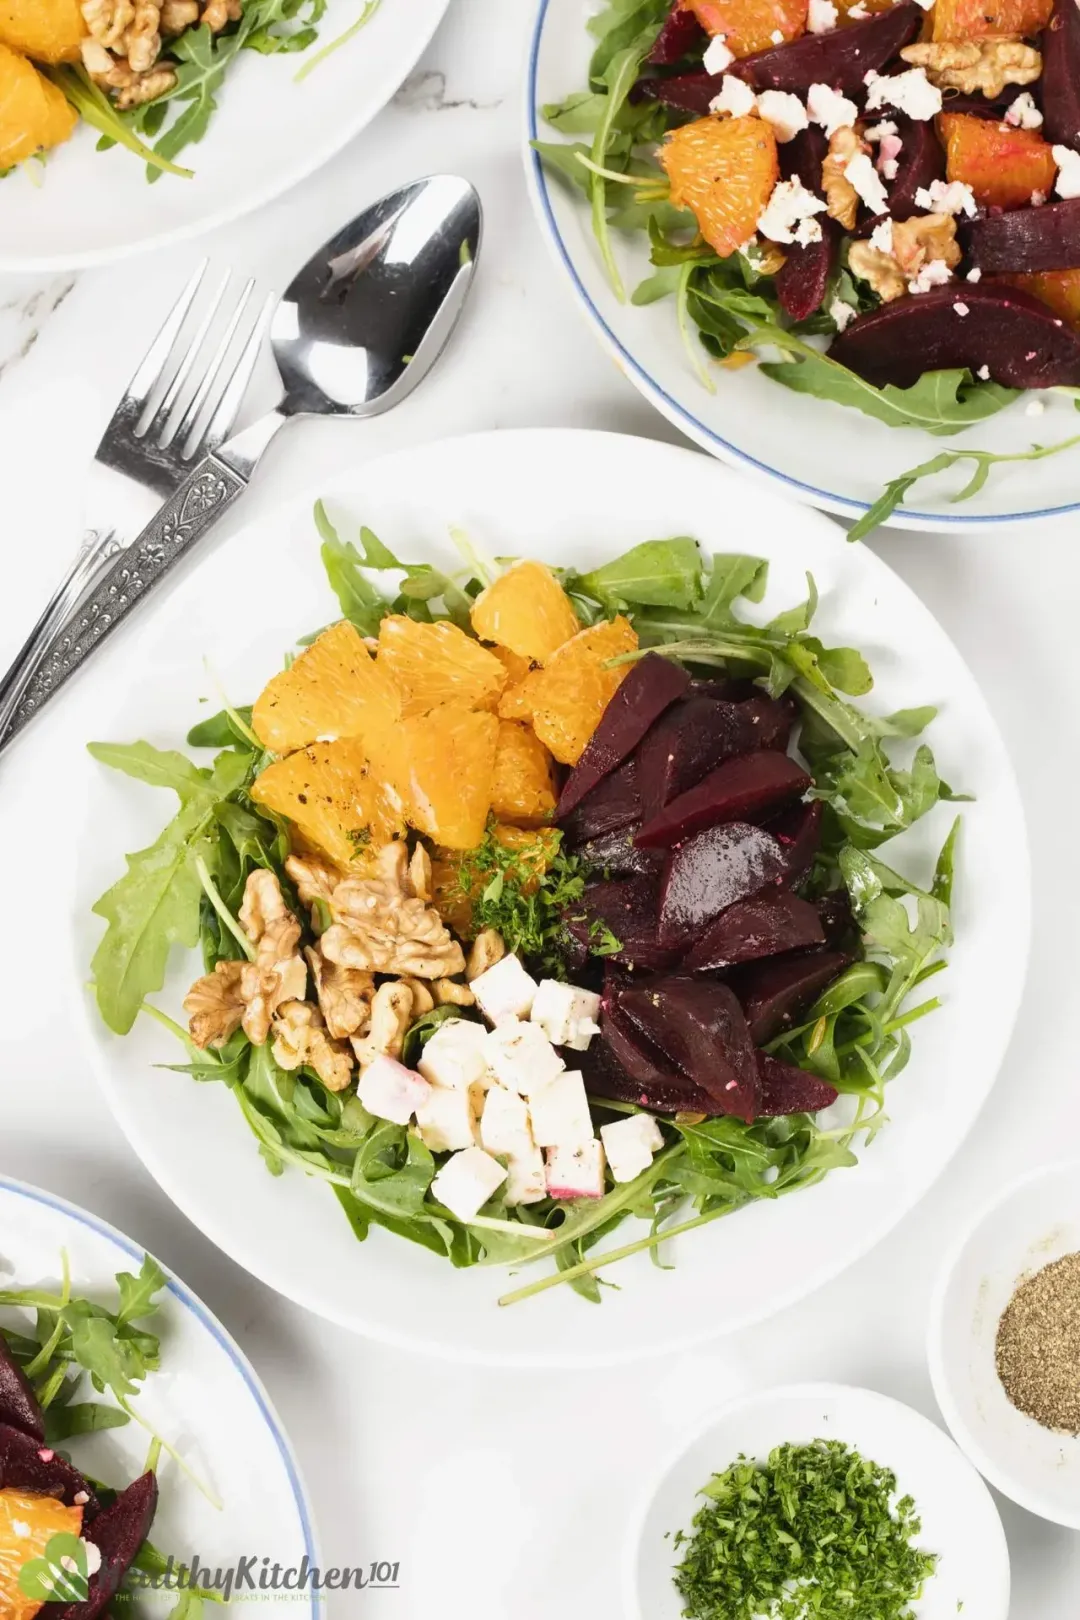 A salad with beets, feta cheese, orange segments, and greens on white plates, and silver cutleries